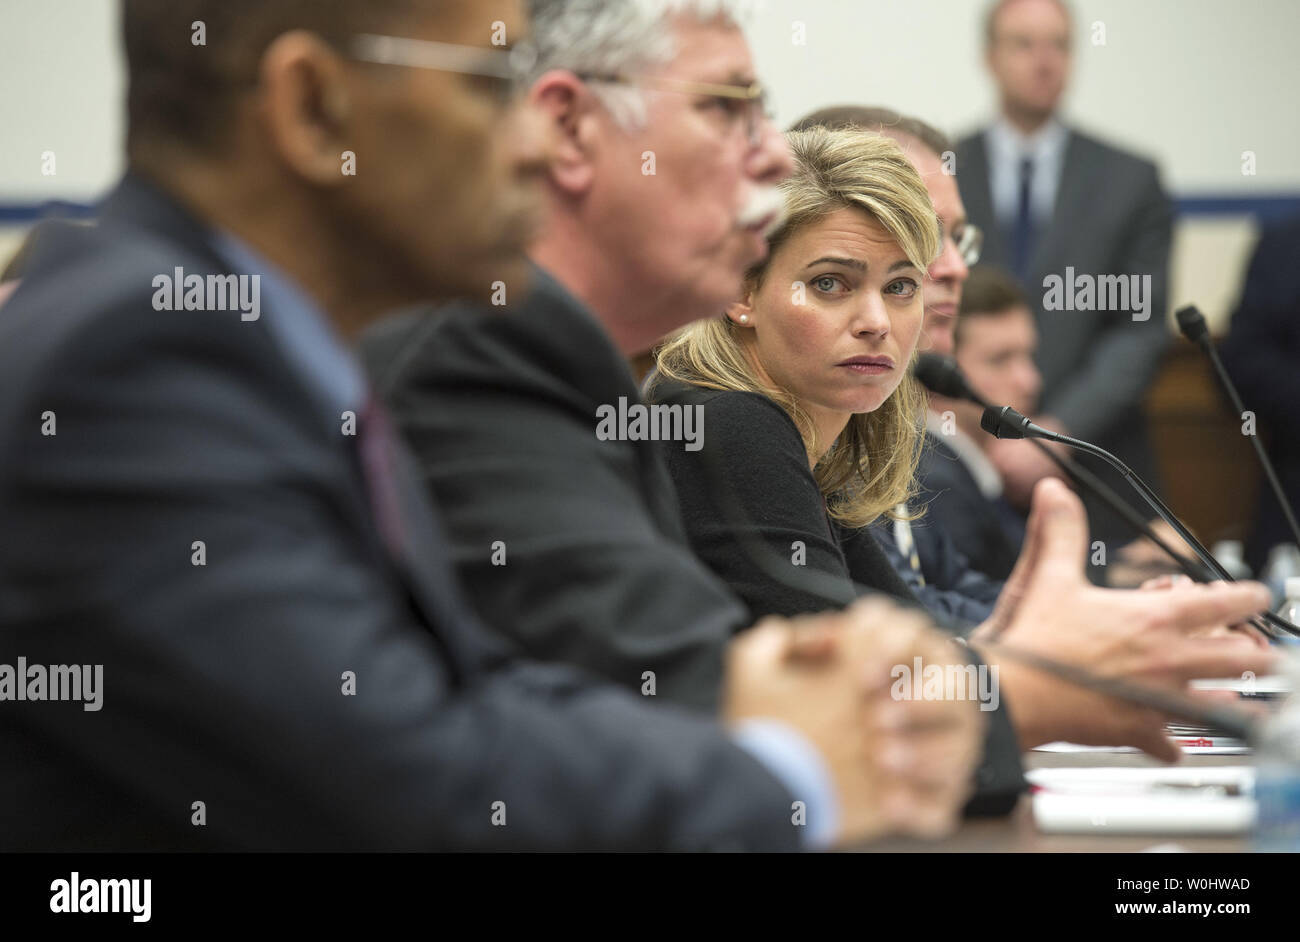 Sarah Feinberg, Acting Administrator, Federal Railroad Administration, watches as Joseph H. Boardman (C), President and Chief Executive Officer of Amtrak, and Christopher Hart, Chairman, National Transportation Safety Board, testify during a House Committee on Transportation and Infrastructure hearing on Amtrak Accident in Philadelphia on Capitol Hill in Washington, D.C. on June 2, 2015. Photo by Kevin Dietsch/UPI Stock Photo